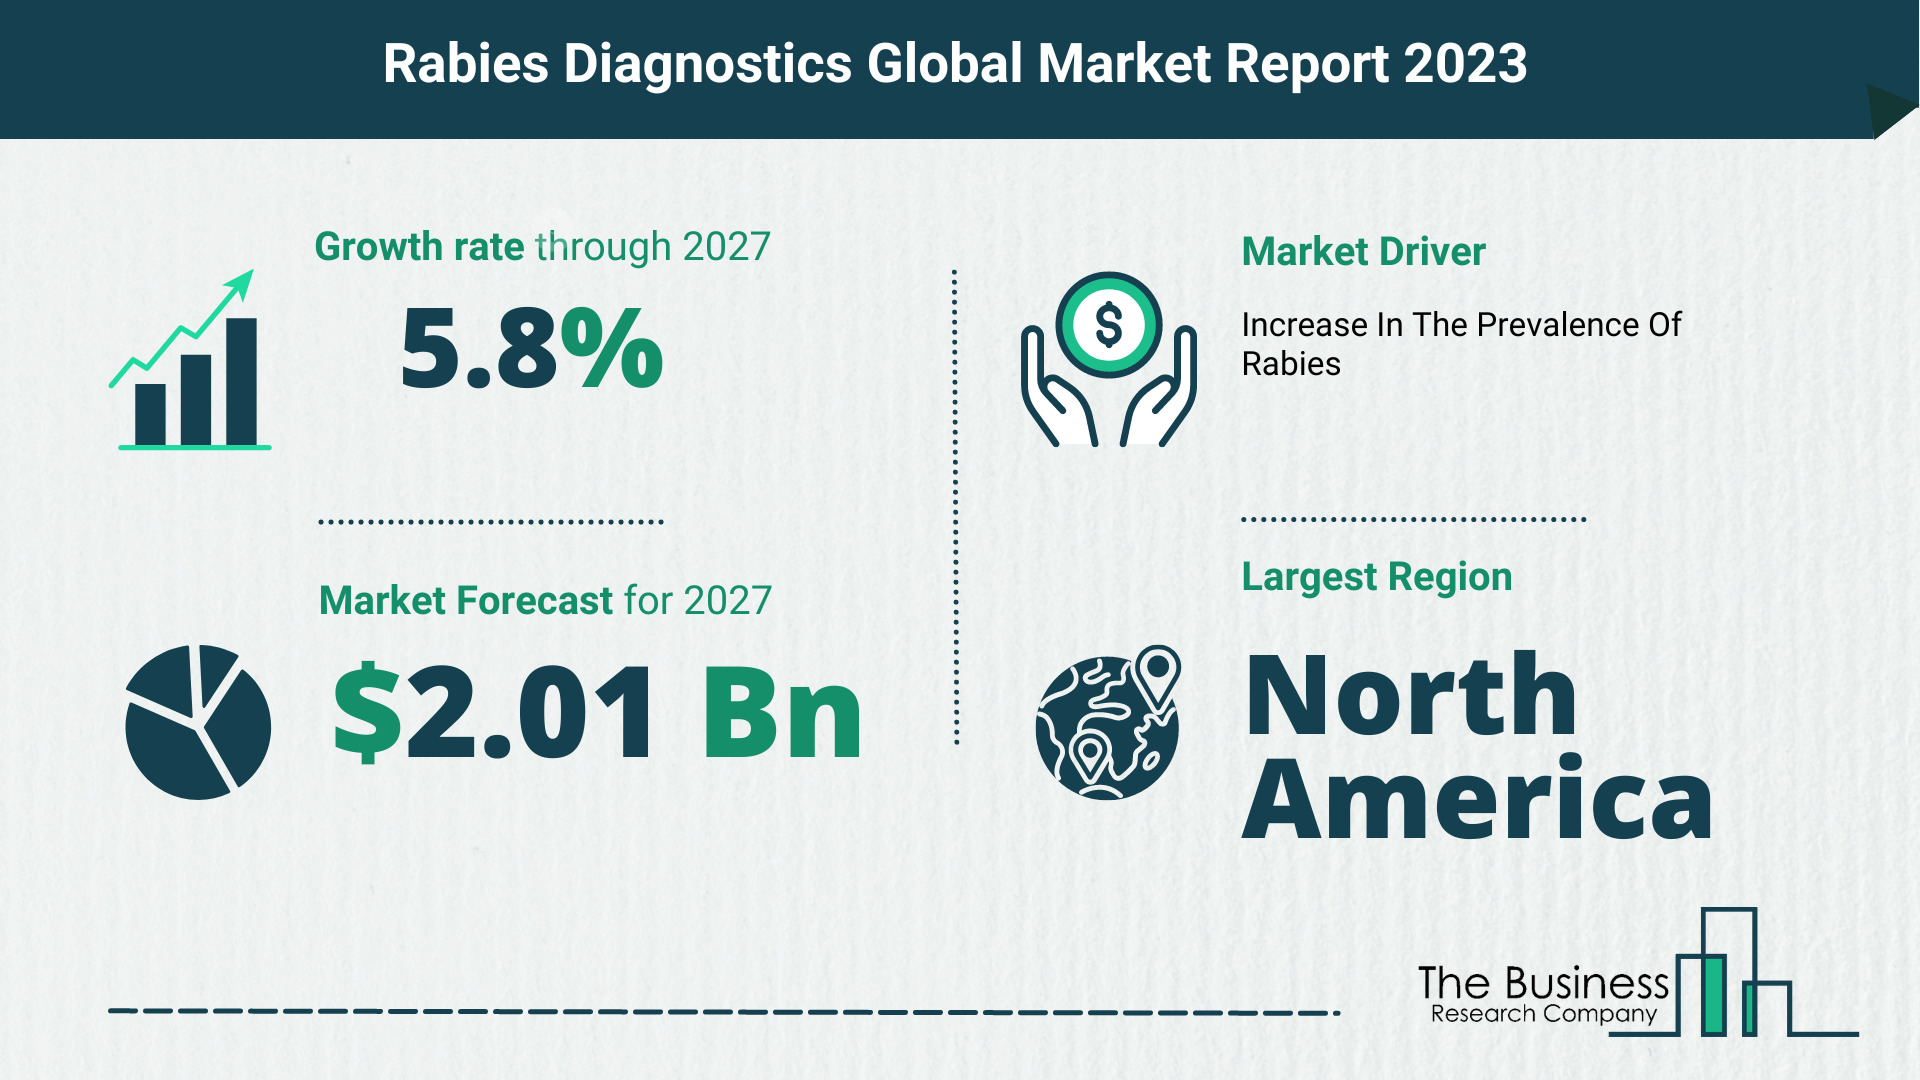 What Will The Rabies Diagnostics Market Look Like In 2023?